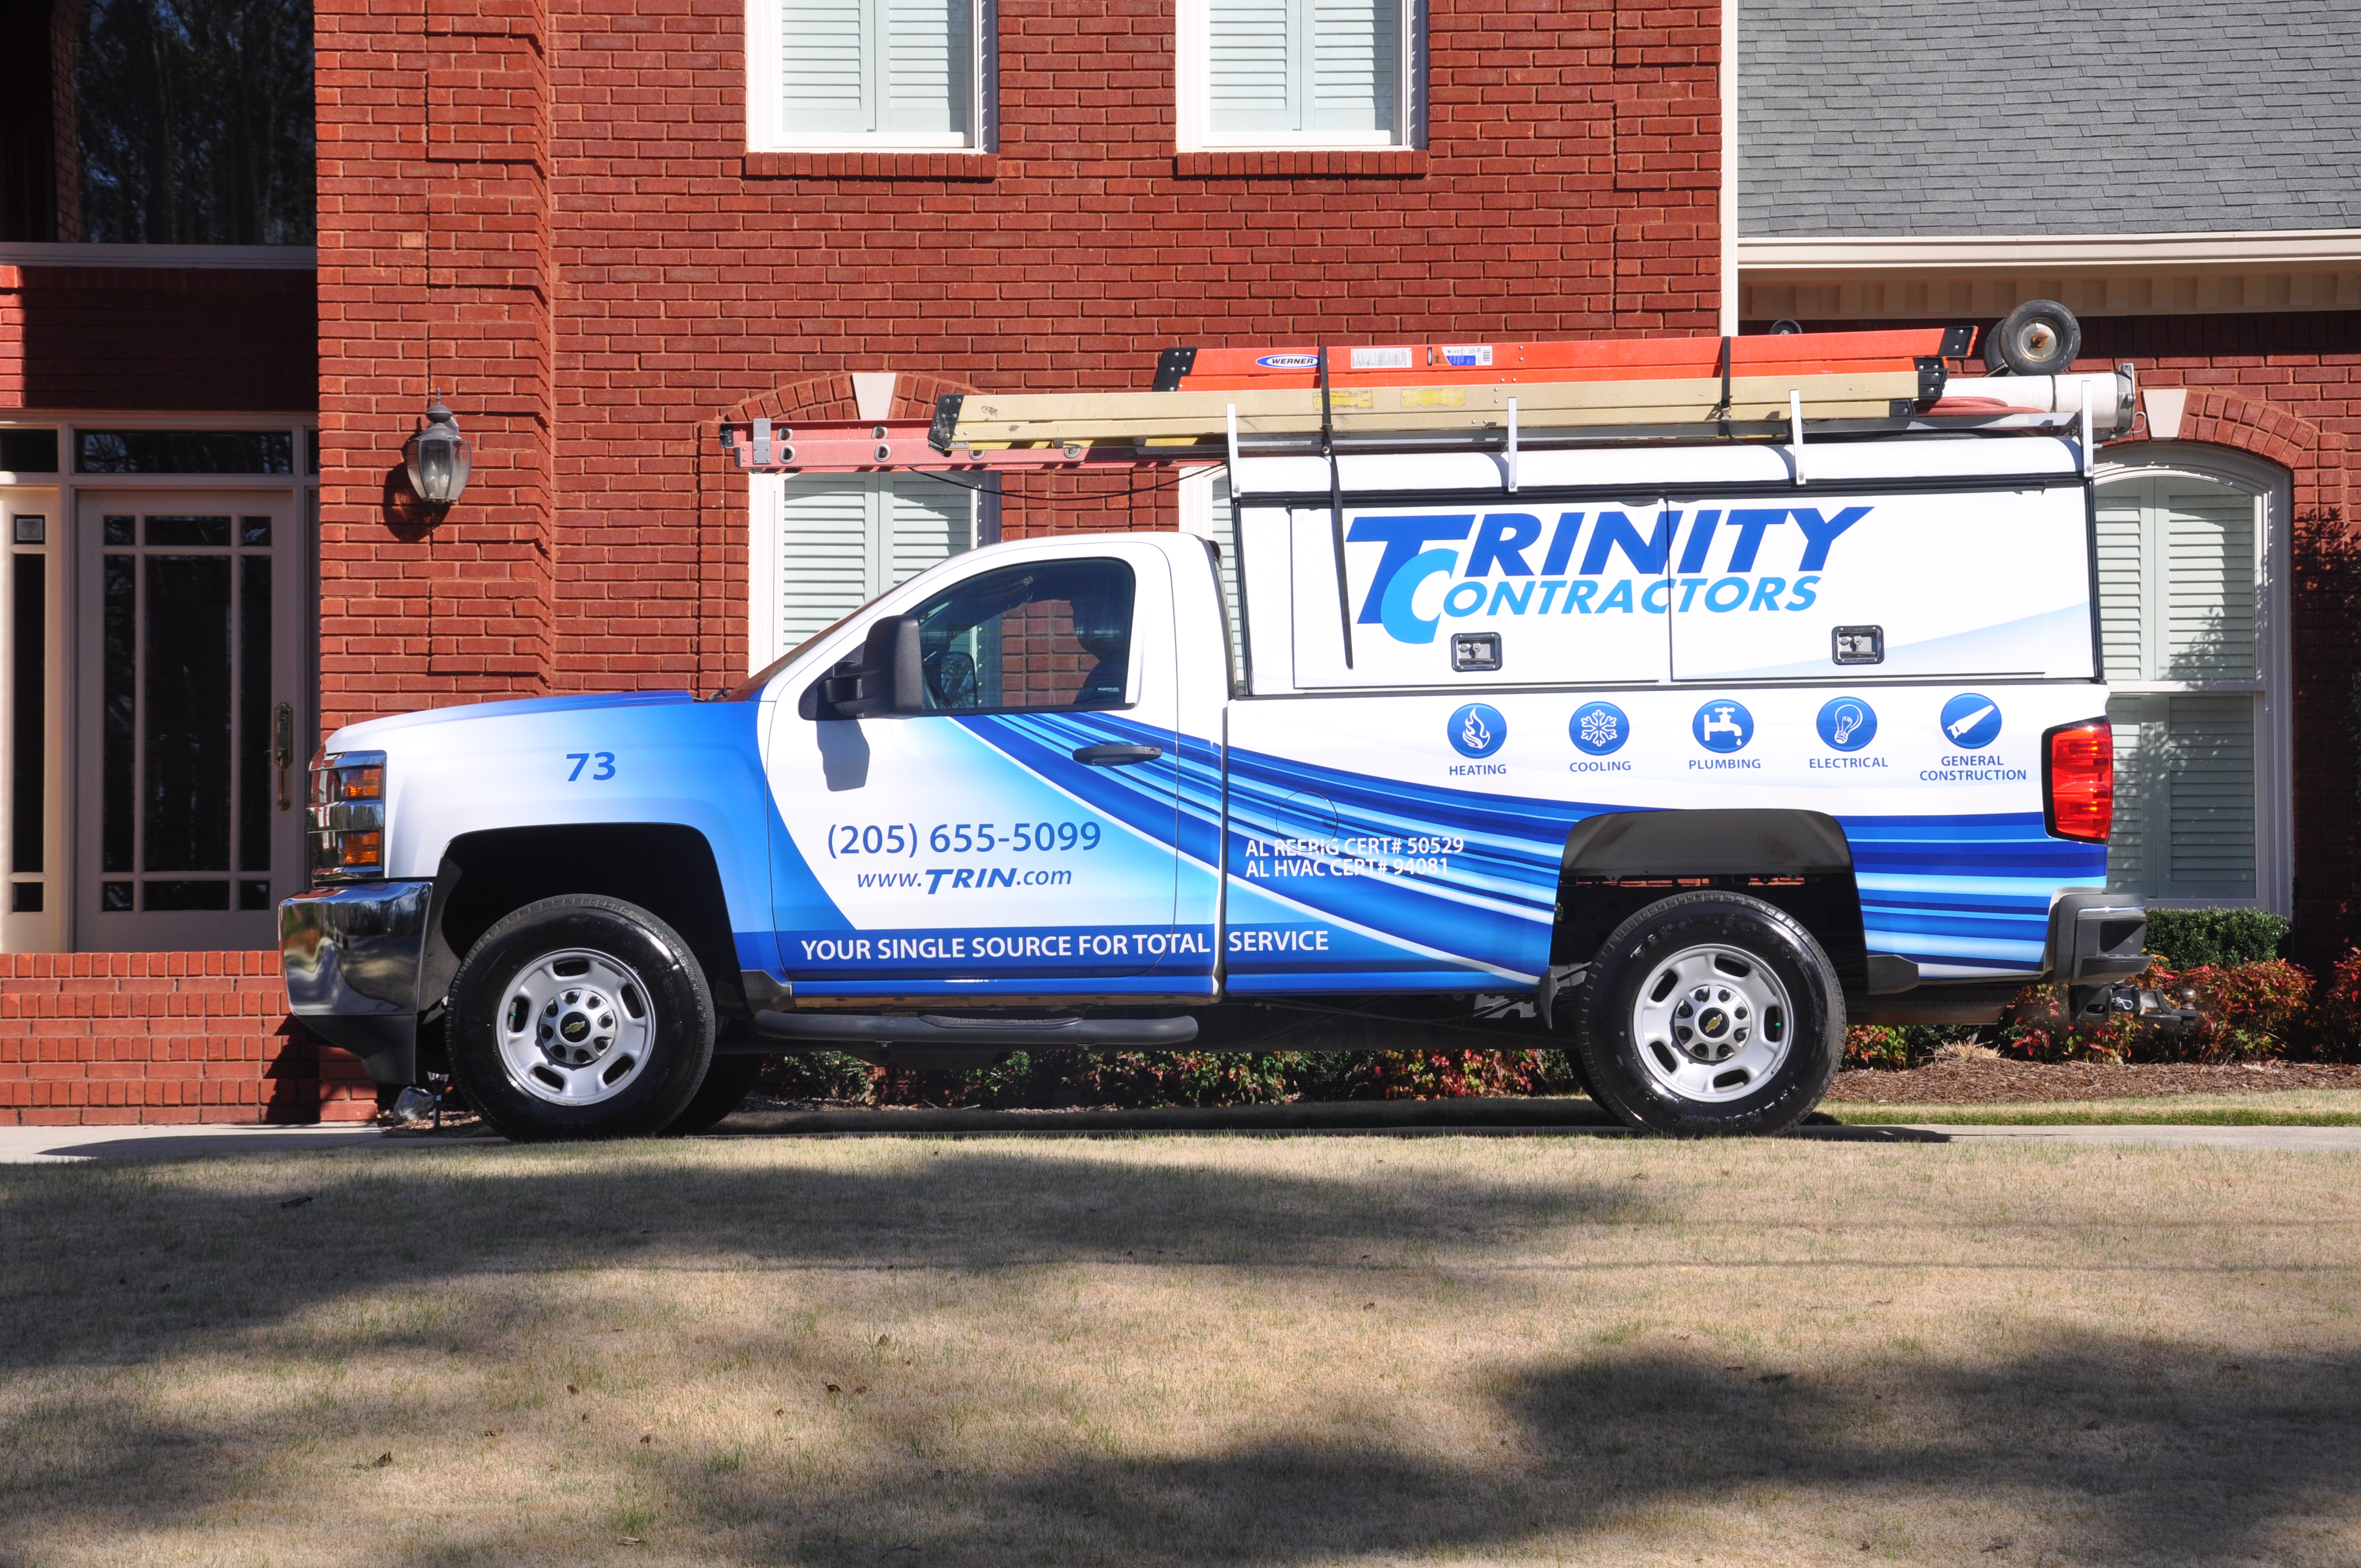 Trinity Contractors: Central Alabama’s single source for total service